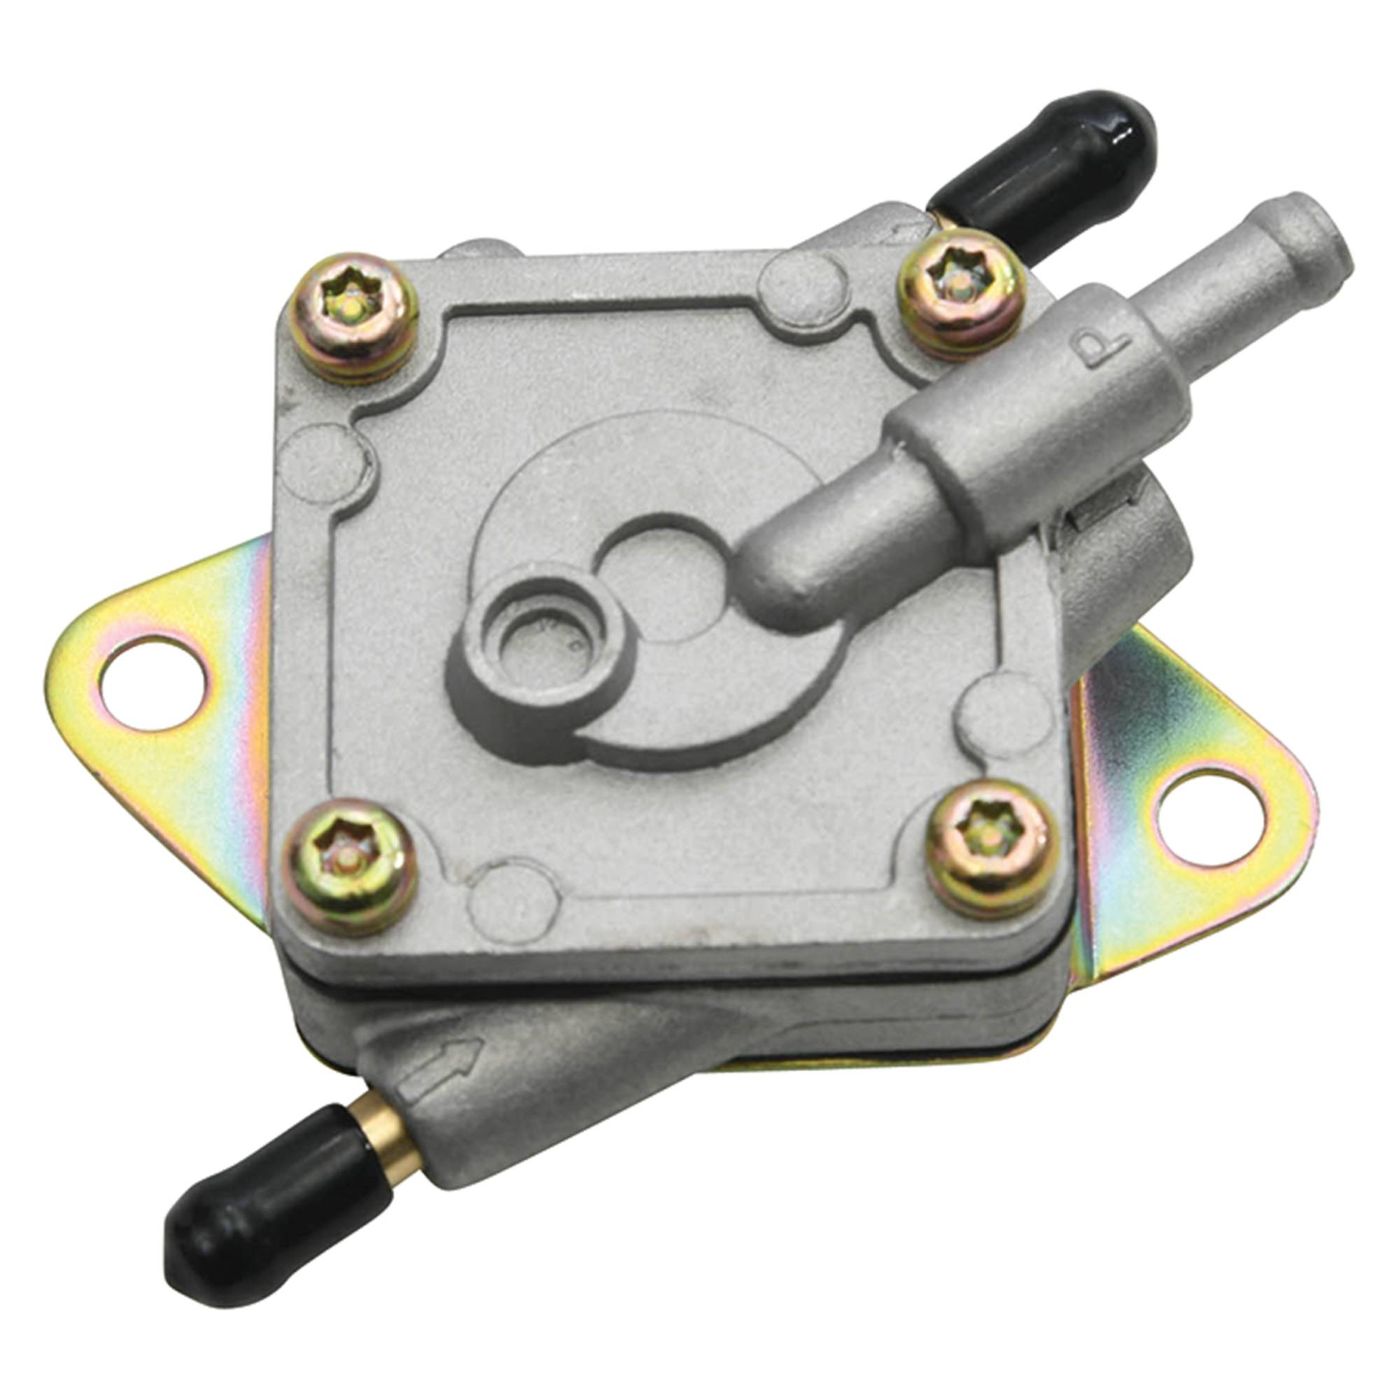 Wrp Fuel Pumps - WRP475009 image